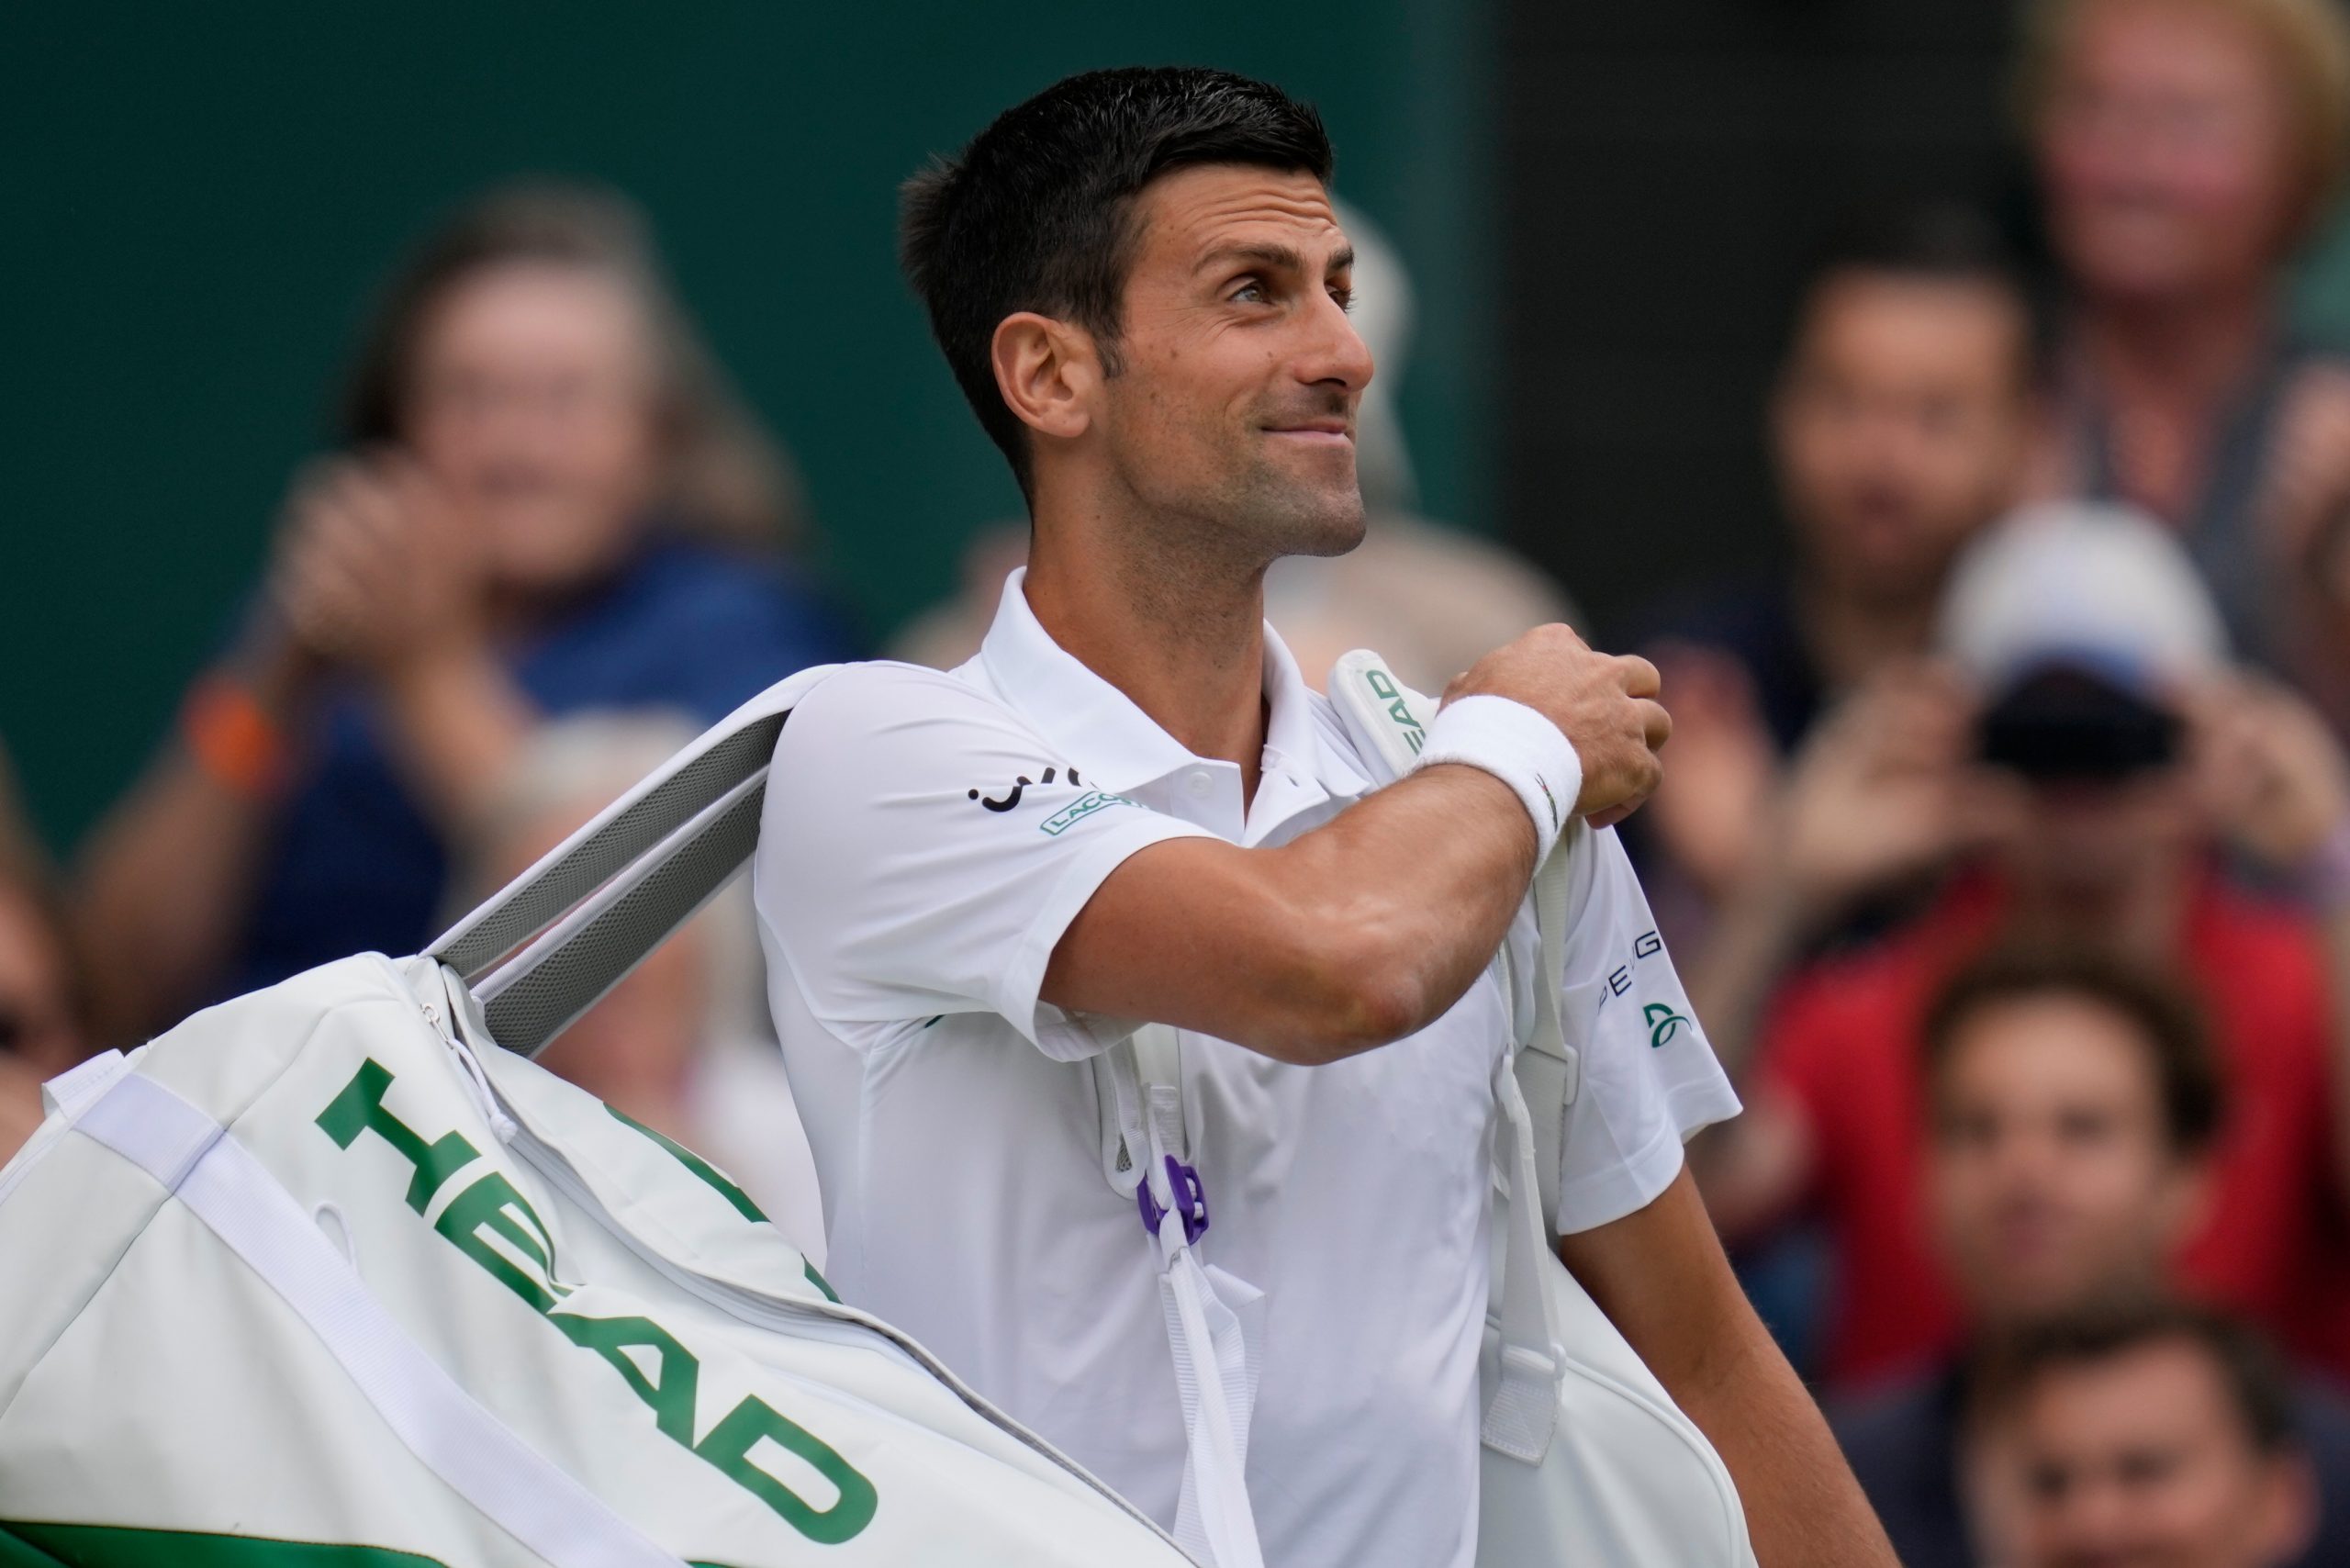 Tennis: Djokovic and Federer Continue Quest for Wimbledon Title